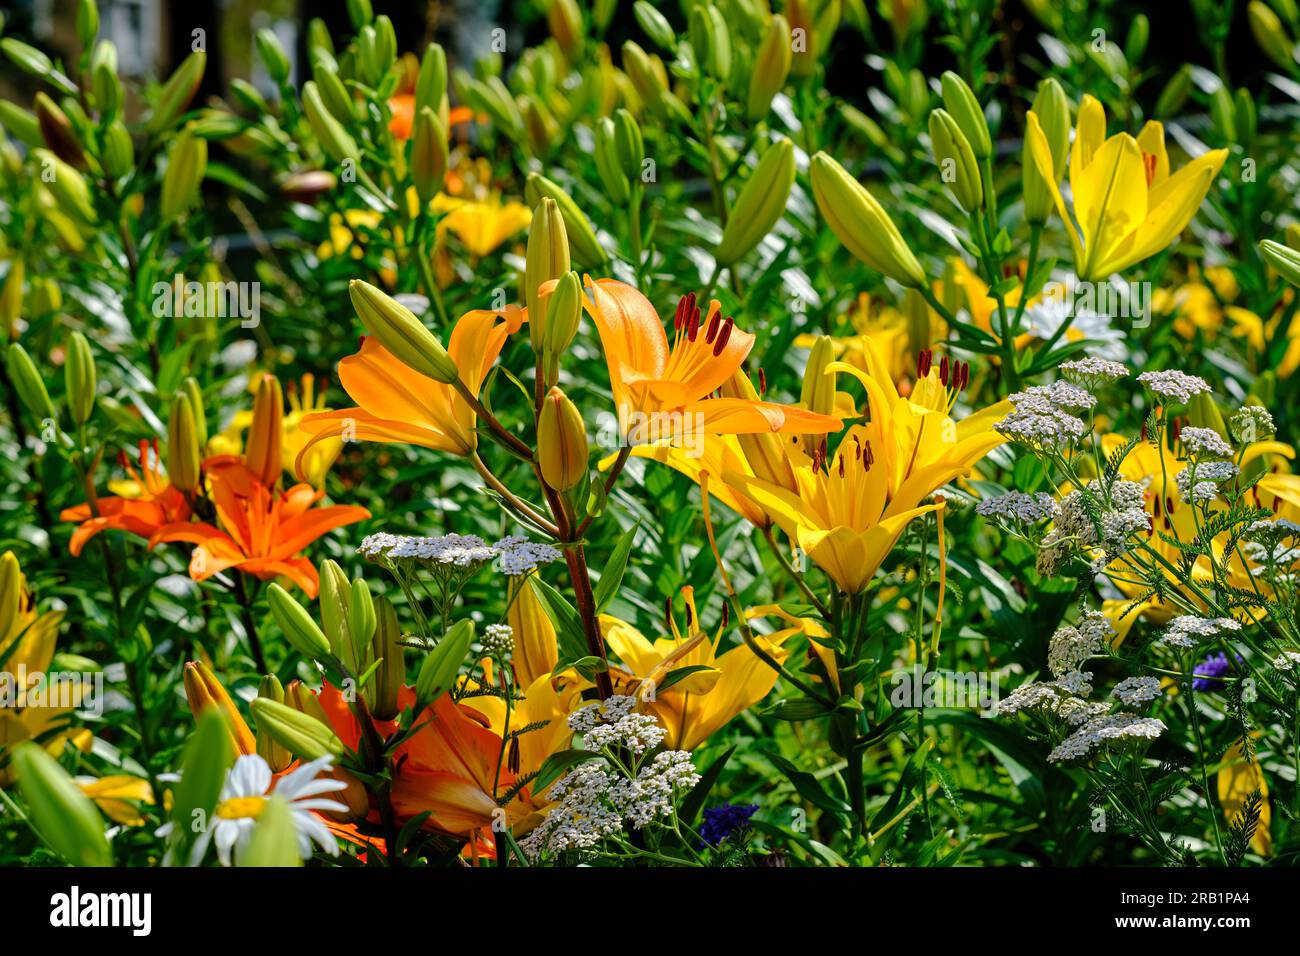 Colorful orange-yellow lily and other flowers blooming in the garden on a sunny day. Summer meadow concept. Close-up view. Stock Photo